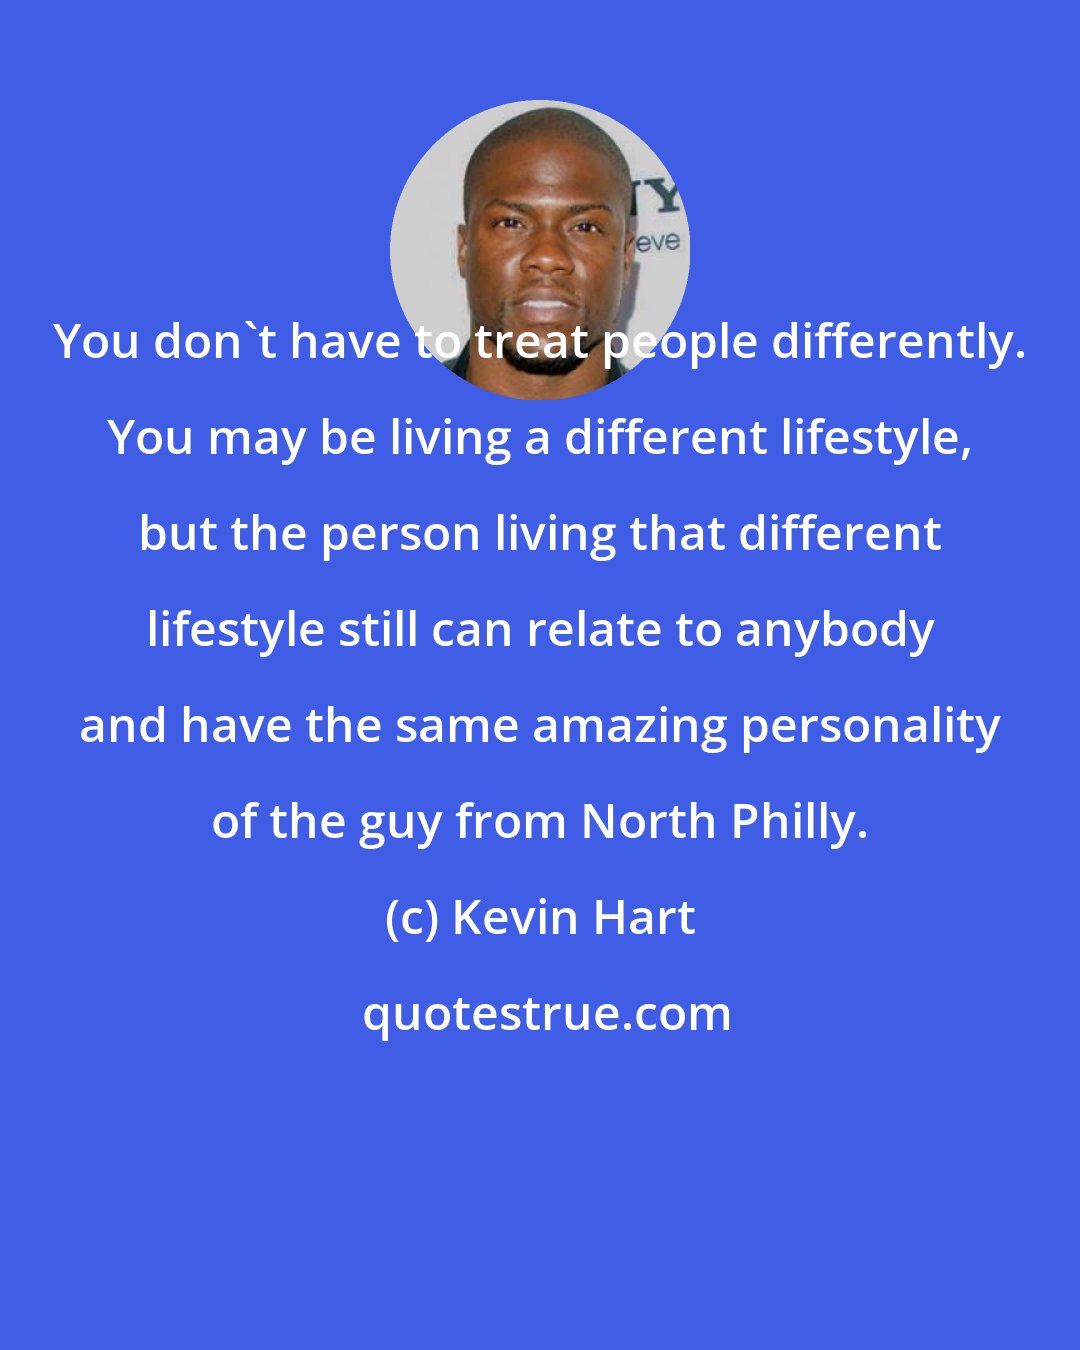 Kevin Hart: You don't have to treat people differently. You may be living a different lifestyle, but the person living that different lifestyle still can relate to anybody and have the same amazing personality of the guy from North Philly.